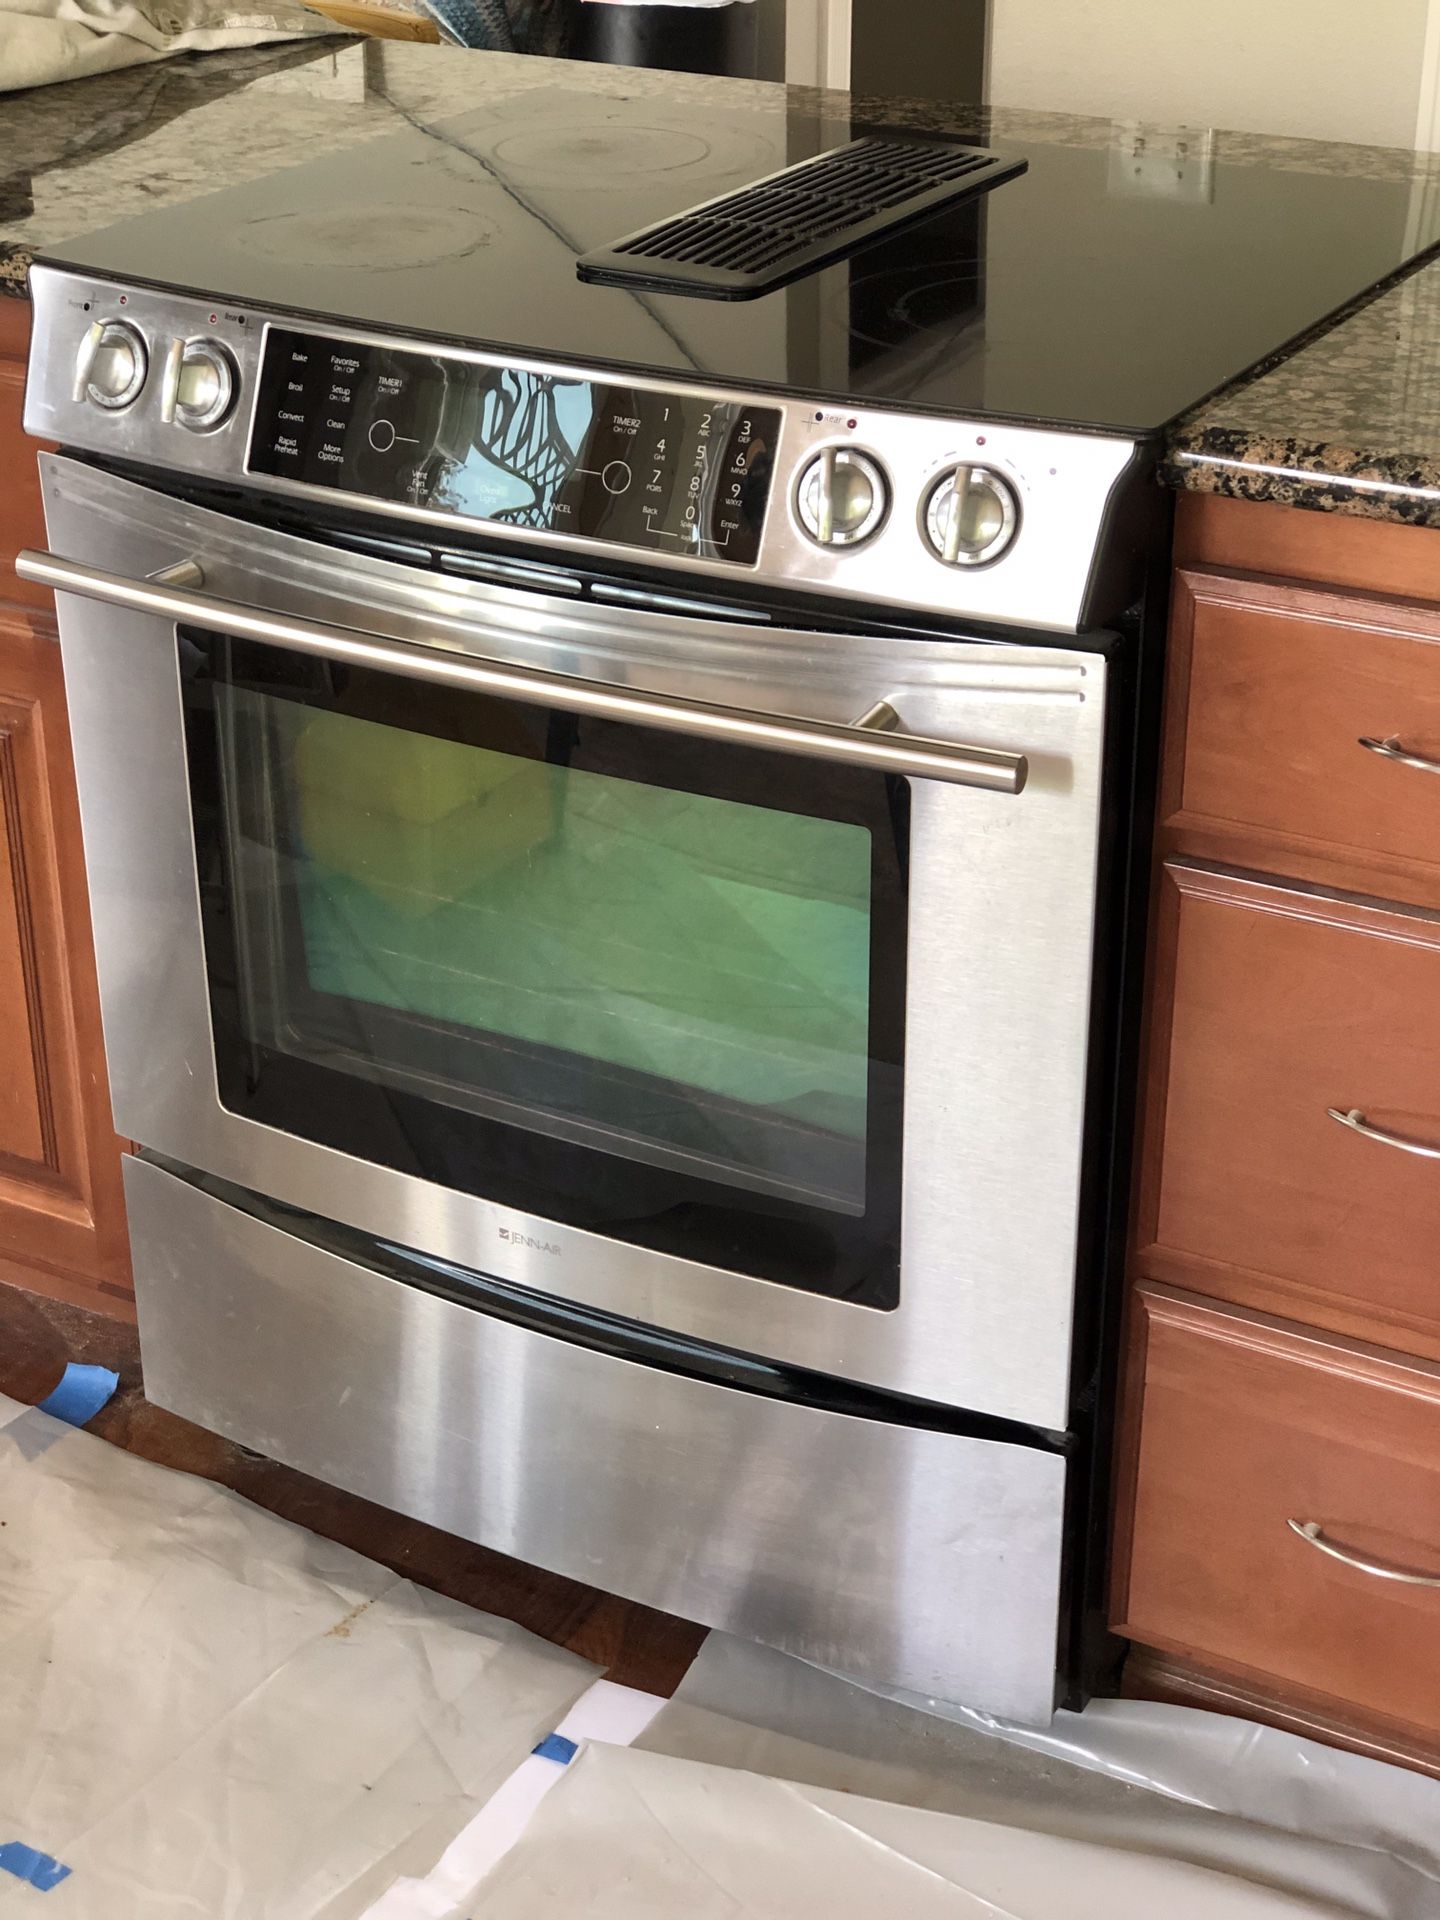 Electric Range 30” Jenn-Air induction with downdraft ventilation.